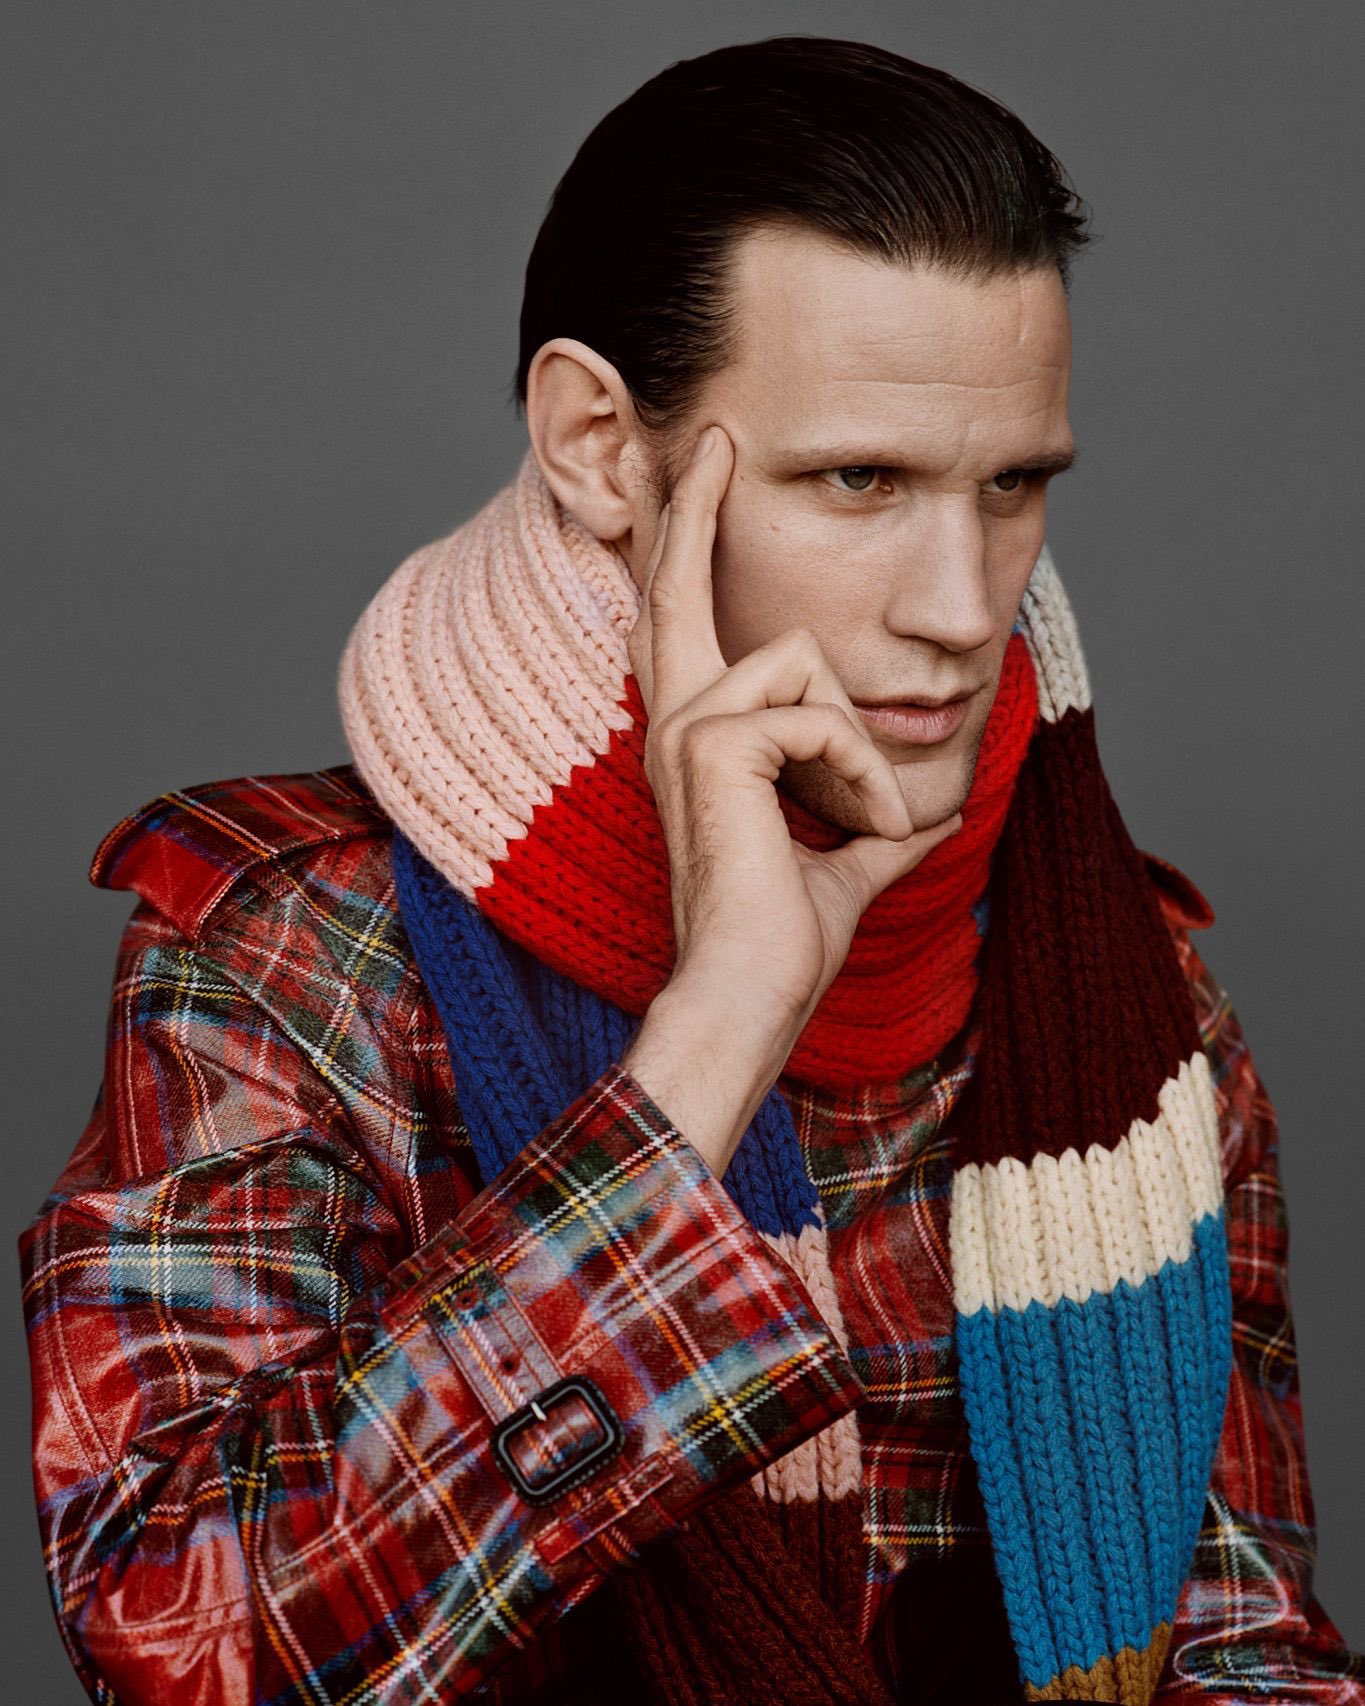 Happy birthday matt smith i want you to know you can wear me as a scarf any time you wish it would be a n honour 